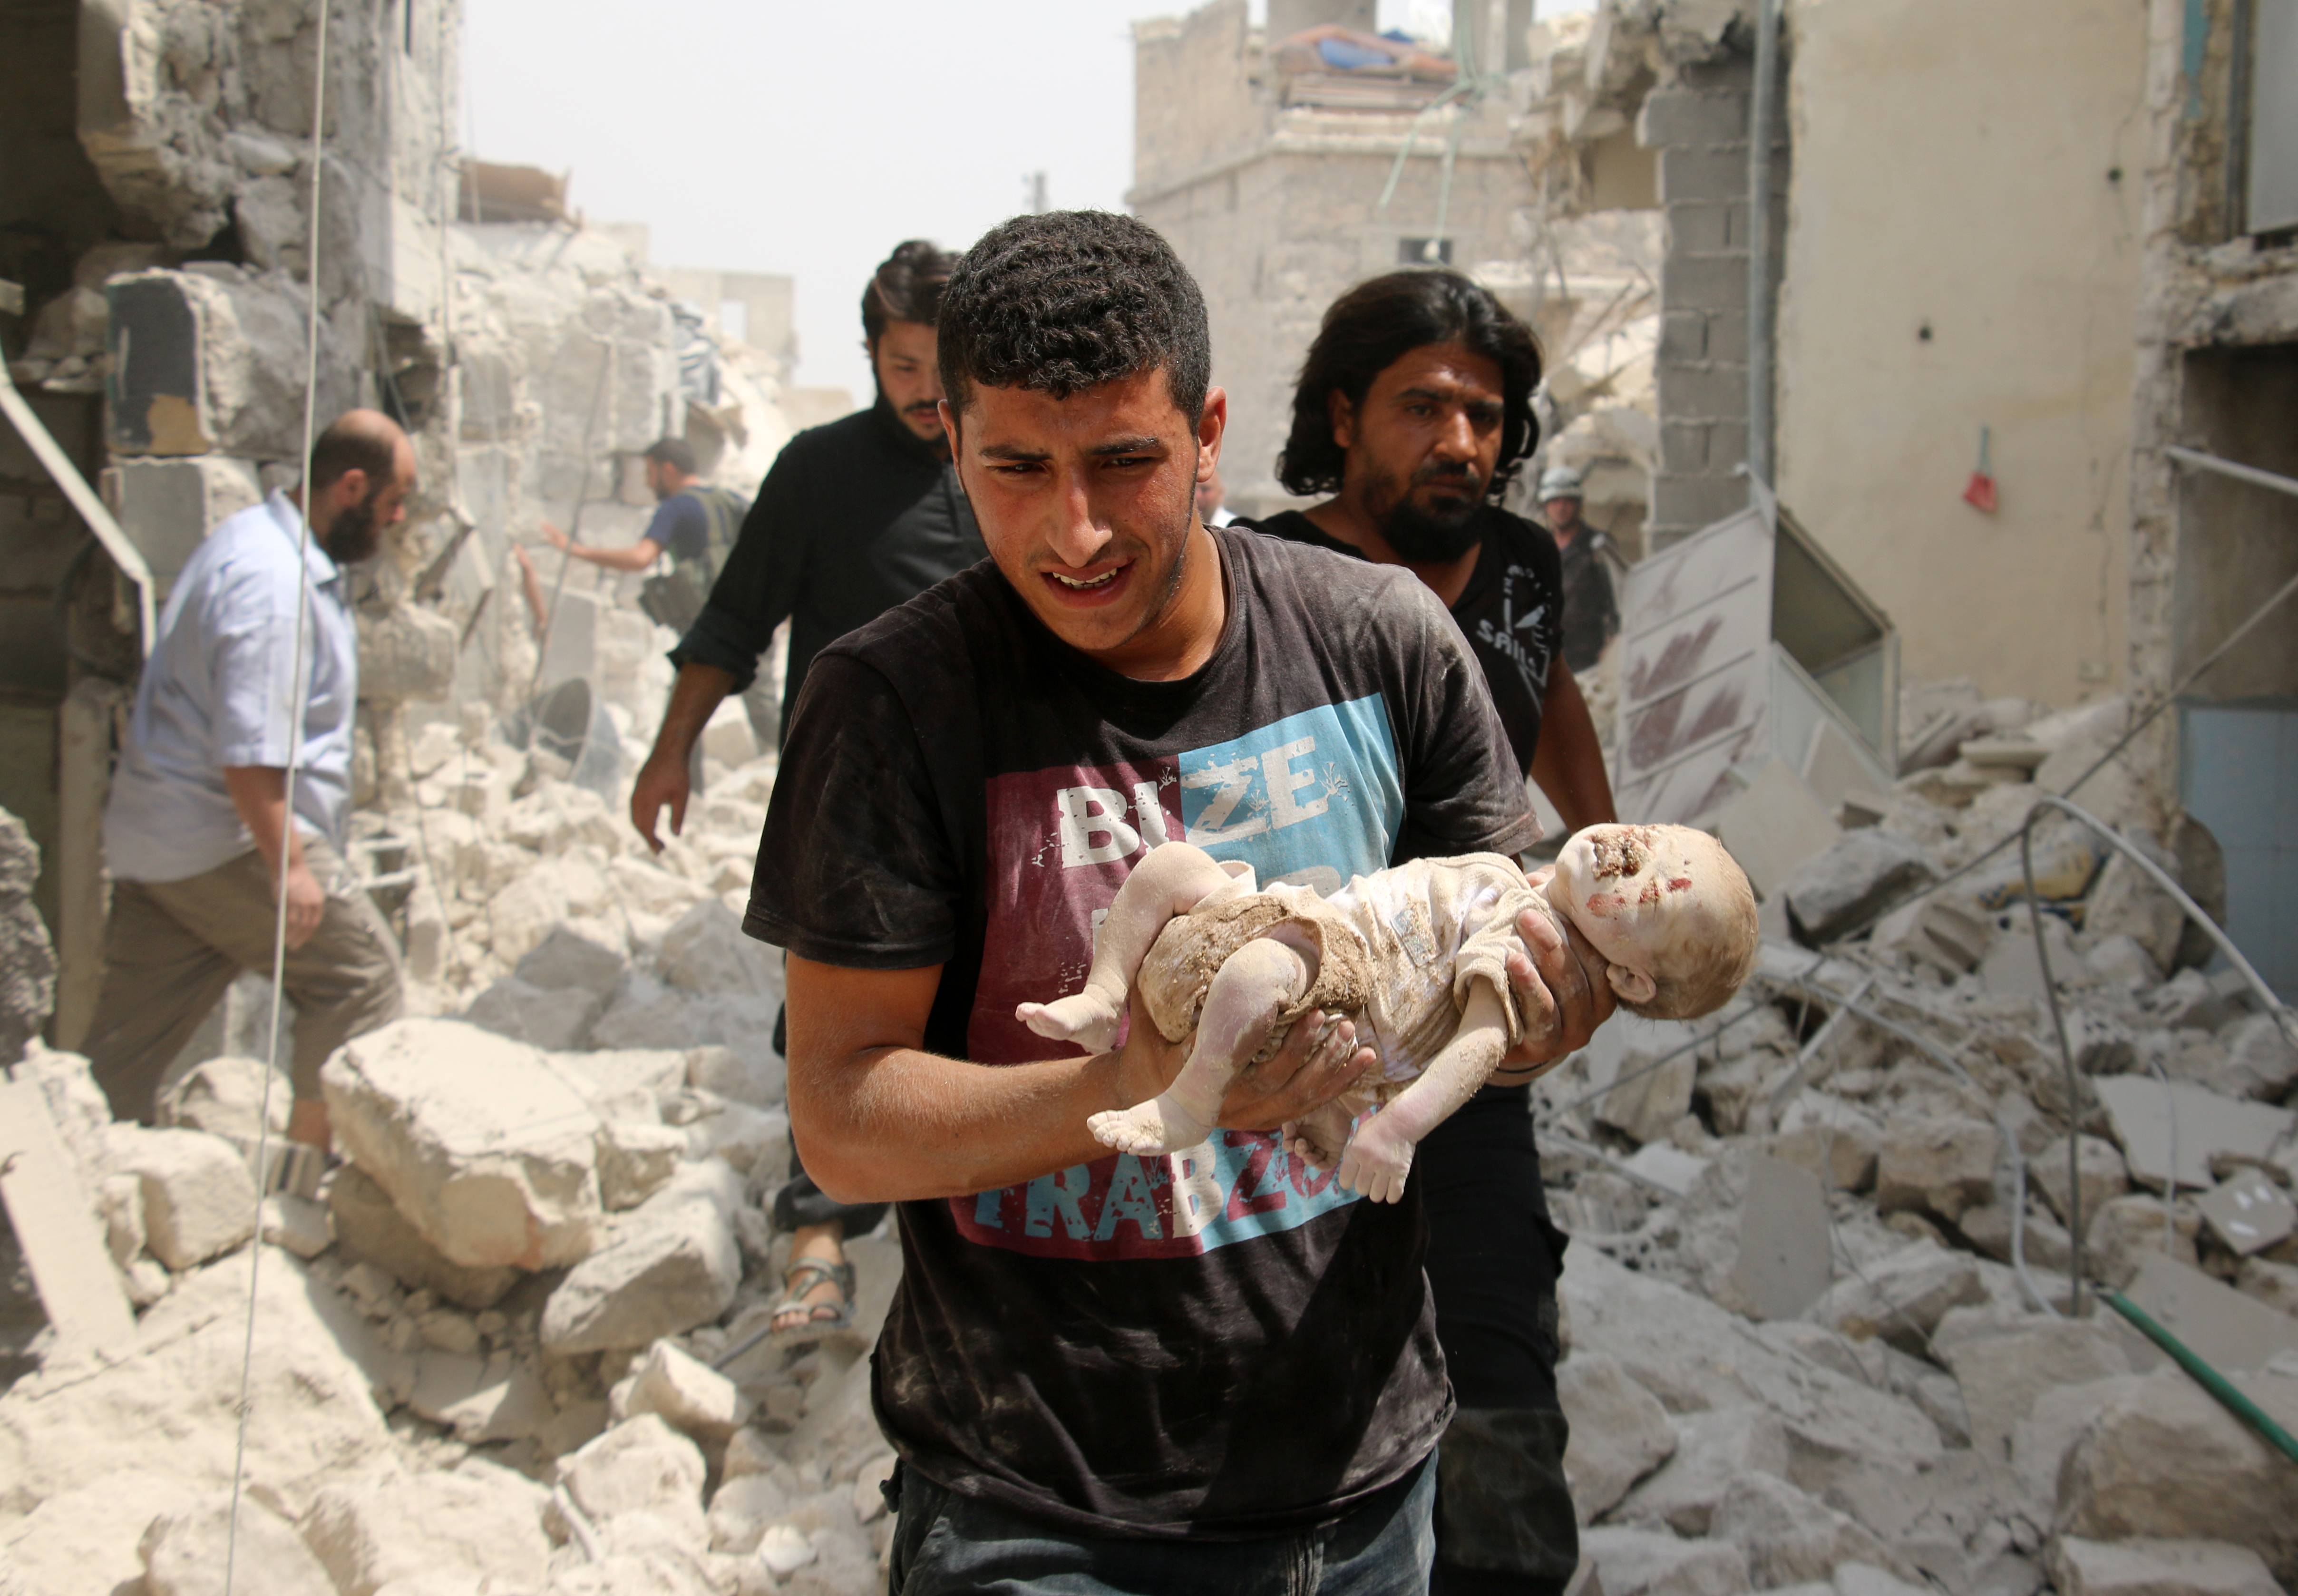 EDITORS NOTE: Graphic content / A Syrian man carries a dead baby in the rubble of buildings following a barrel bomb attack on the Bab al-Nairab neighbourhood of the northern Syrian city of Aleppo on August 25, 2016.  At least fifteen civilians, among them eleven children were killed in a barrel bomb attack carried out by government forces on a rebel-held neighbourhood of Syria's Aleppo city, according to the Syrian Observatory for Human Rights. / AFP PHOTO / AMEER ALHALBI